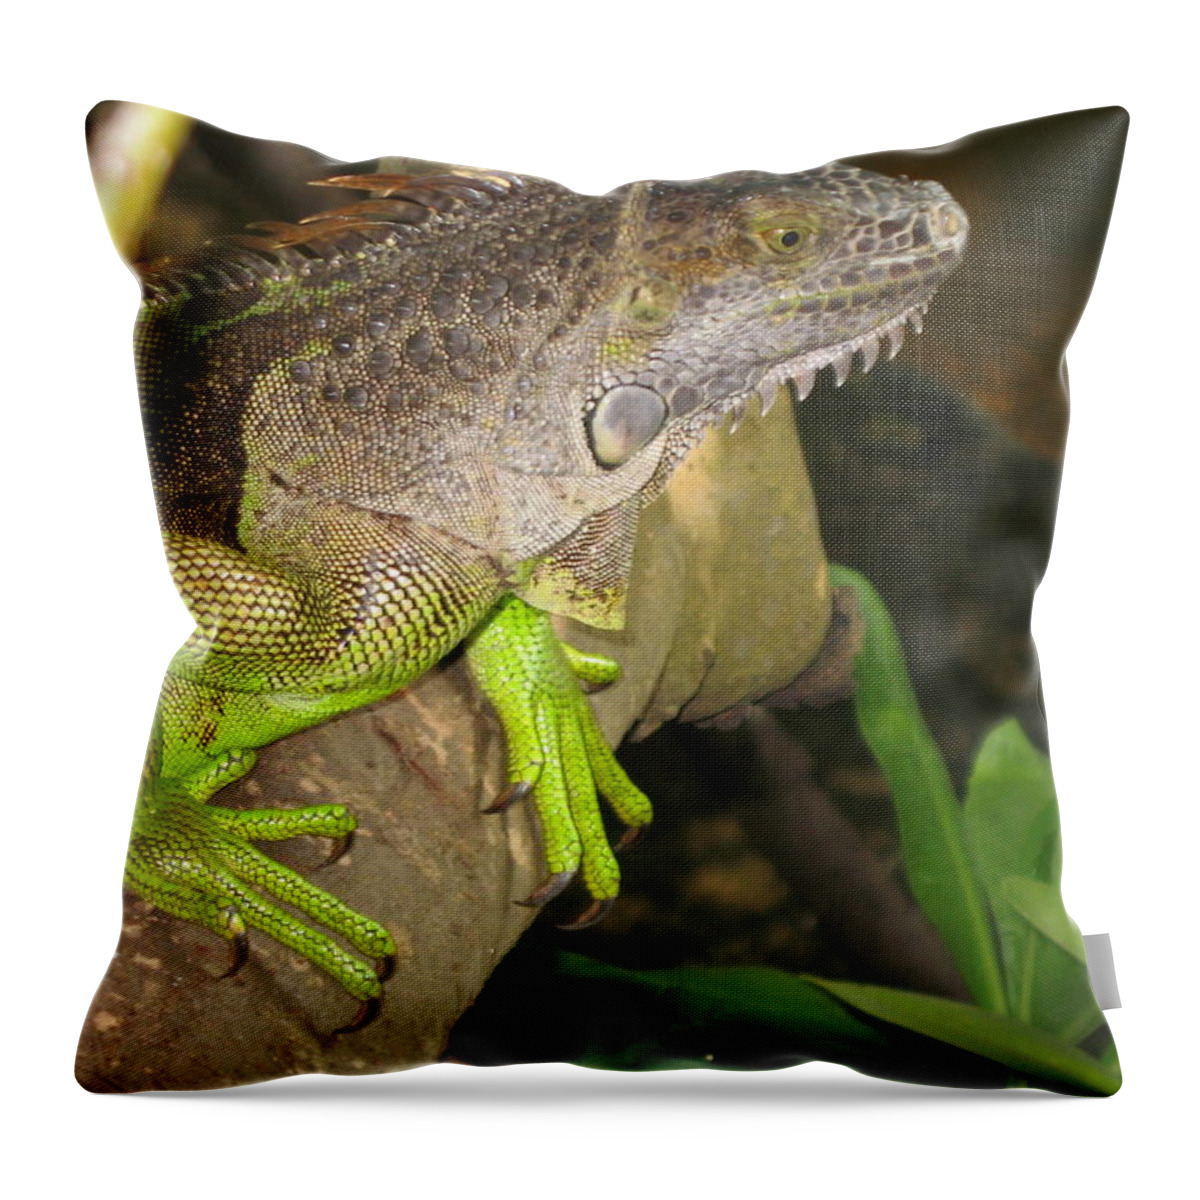 Iguana Throw Pillow featuring the photograph Iguana - A Special Garden Guest by Christiane Schulze Art And Photography